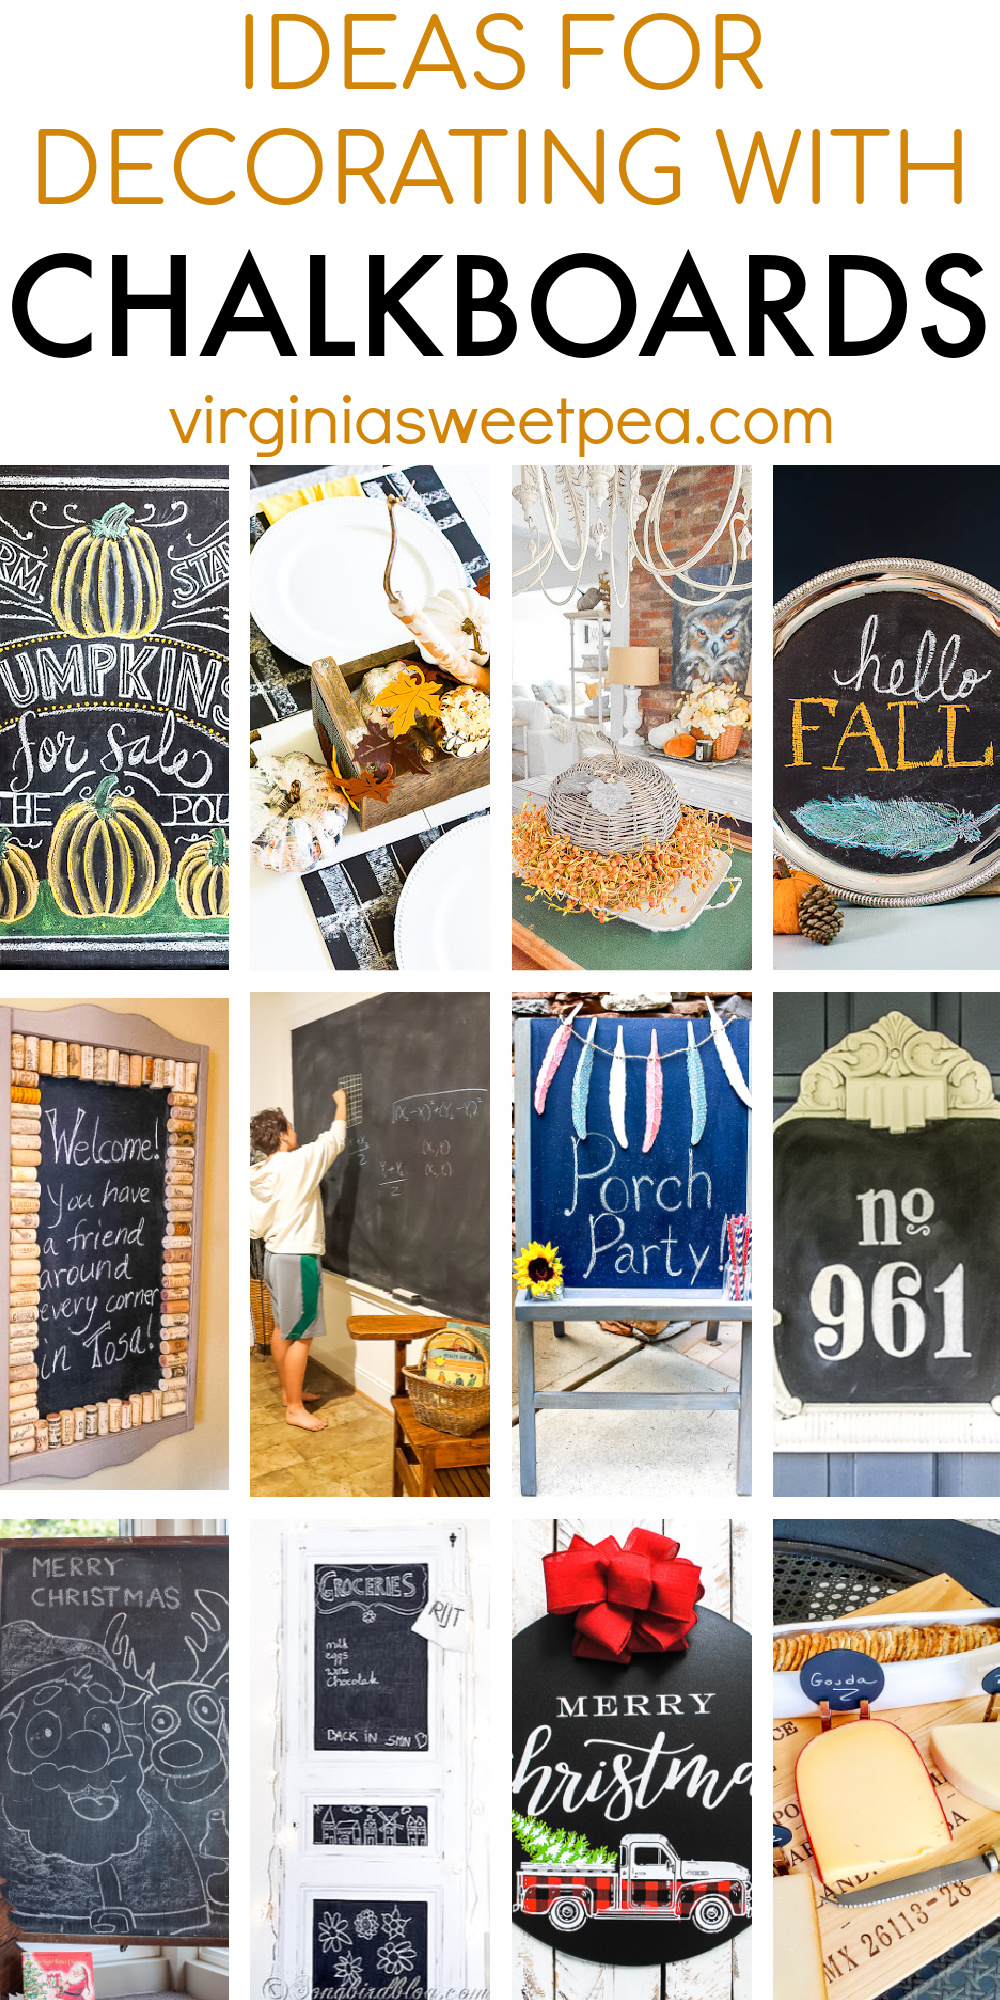 Ideas for Decorating with Chalkboards